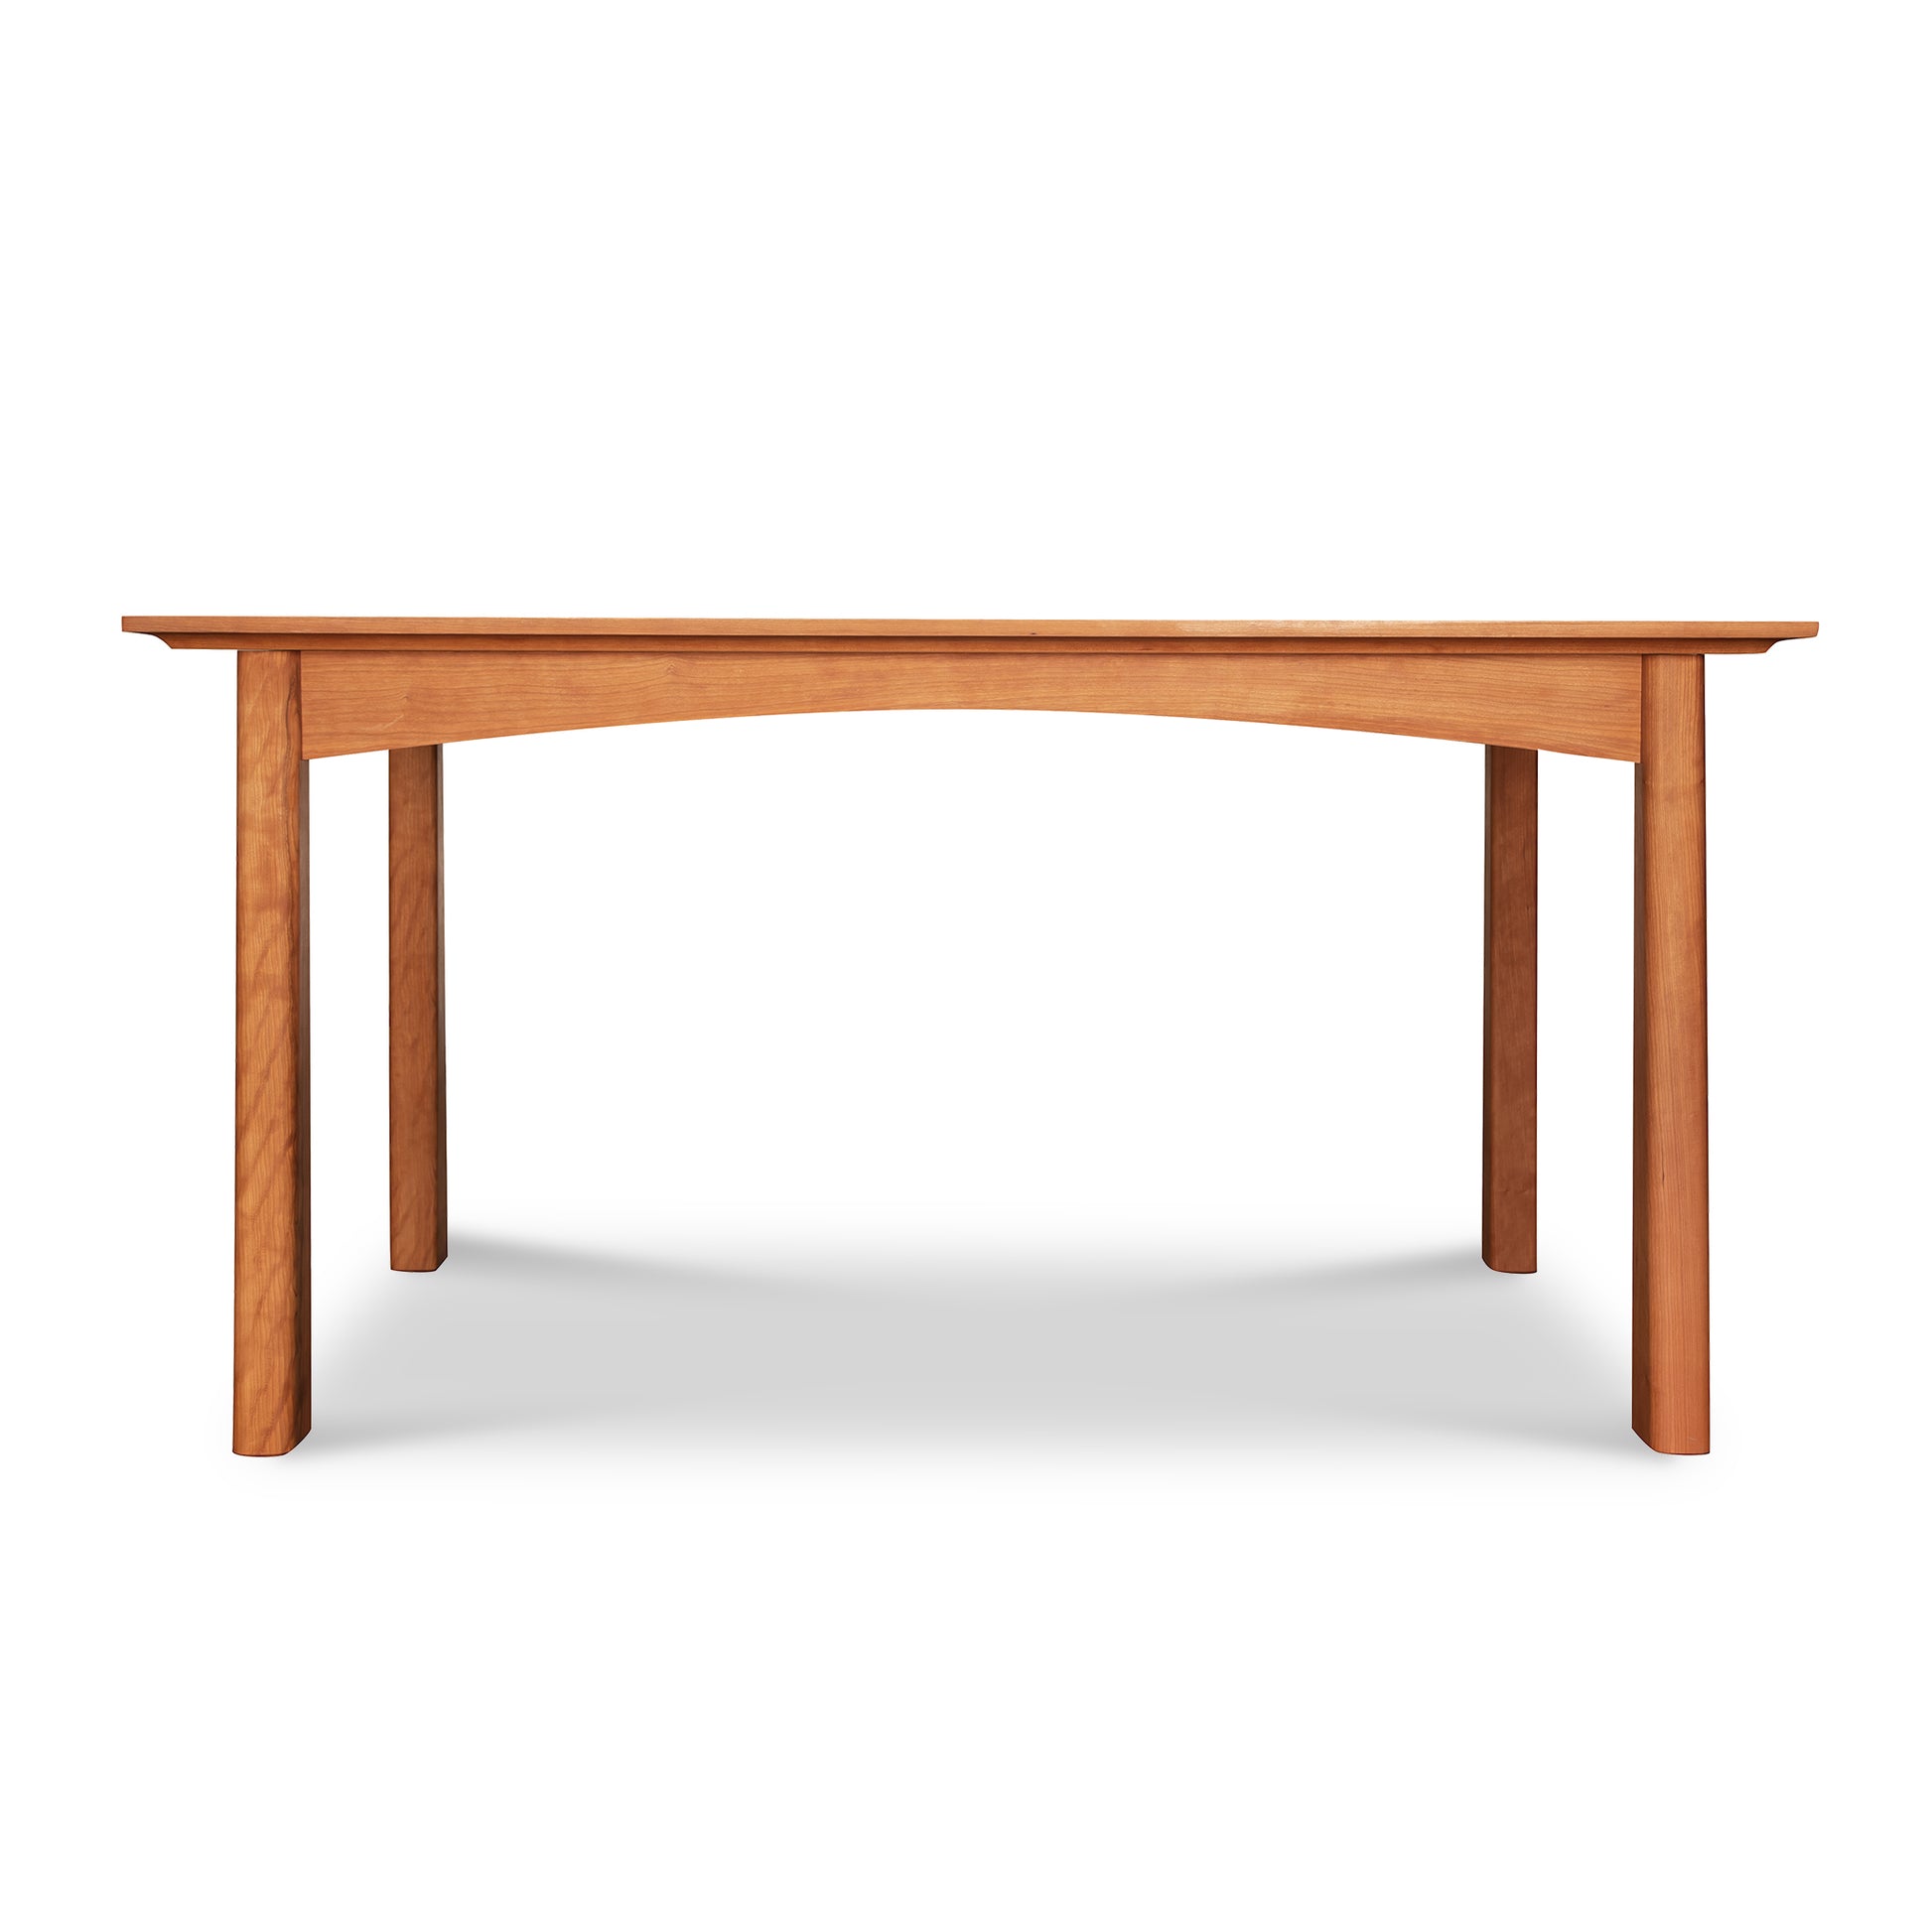 A simple Cherry Moon Solid Top Dining Table with a smooth rectangular top and four sturdy legs, set against a plain white background. The table’s natural cherry wood from Maple Corner Woodworks appears polished and reflects light softly.